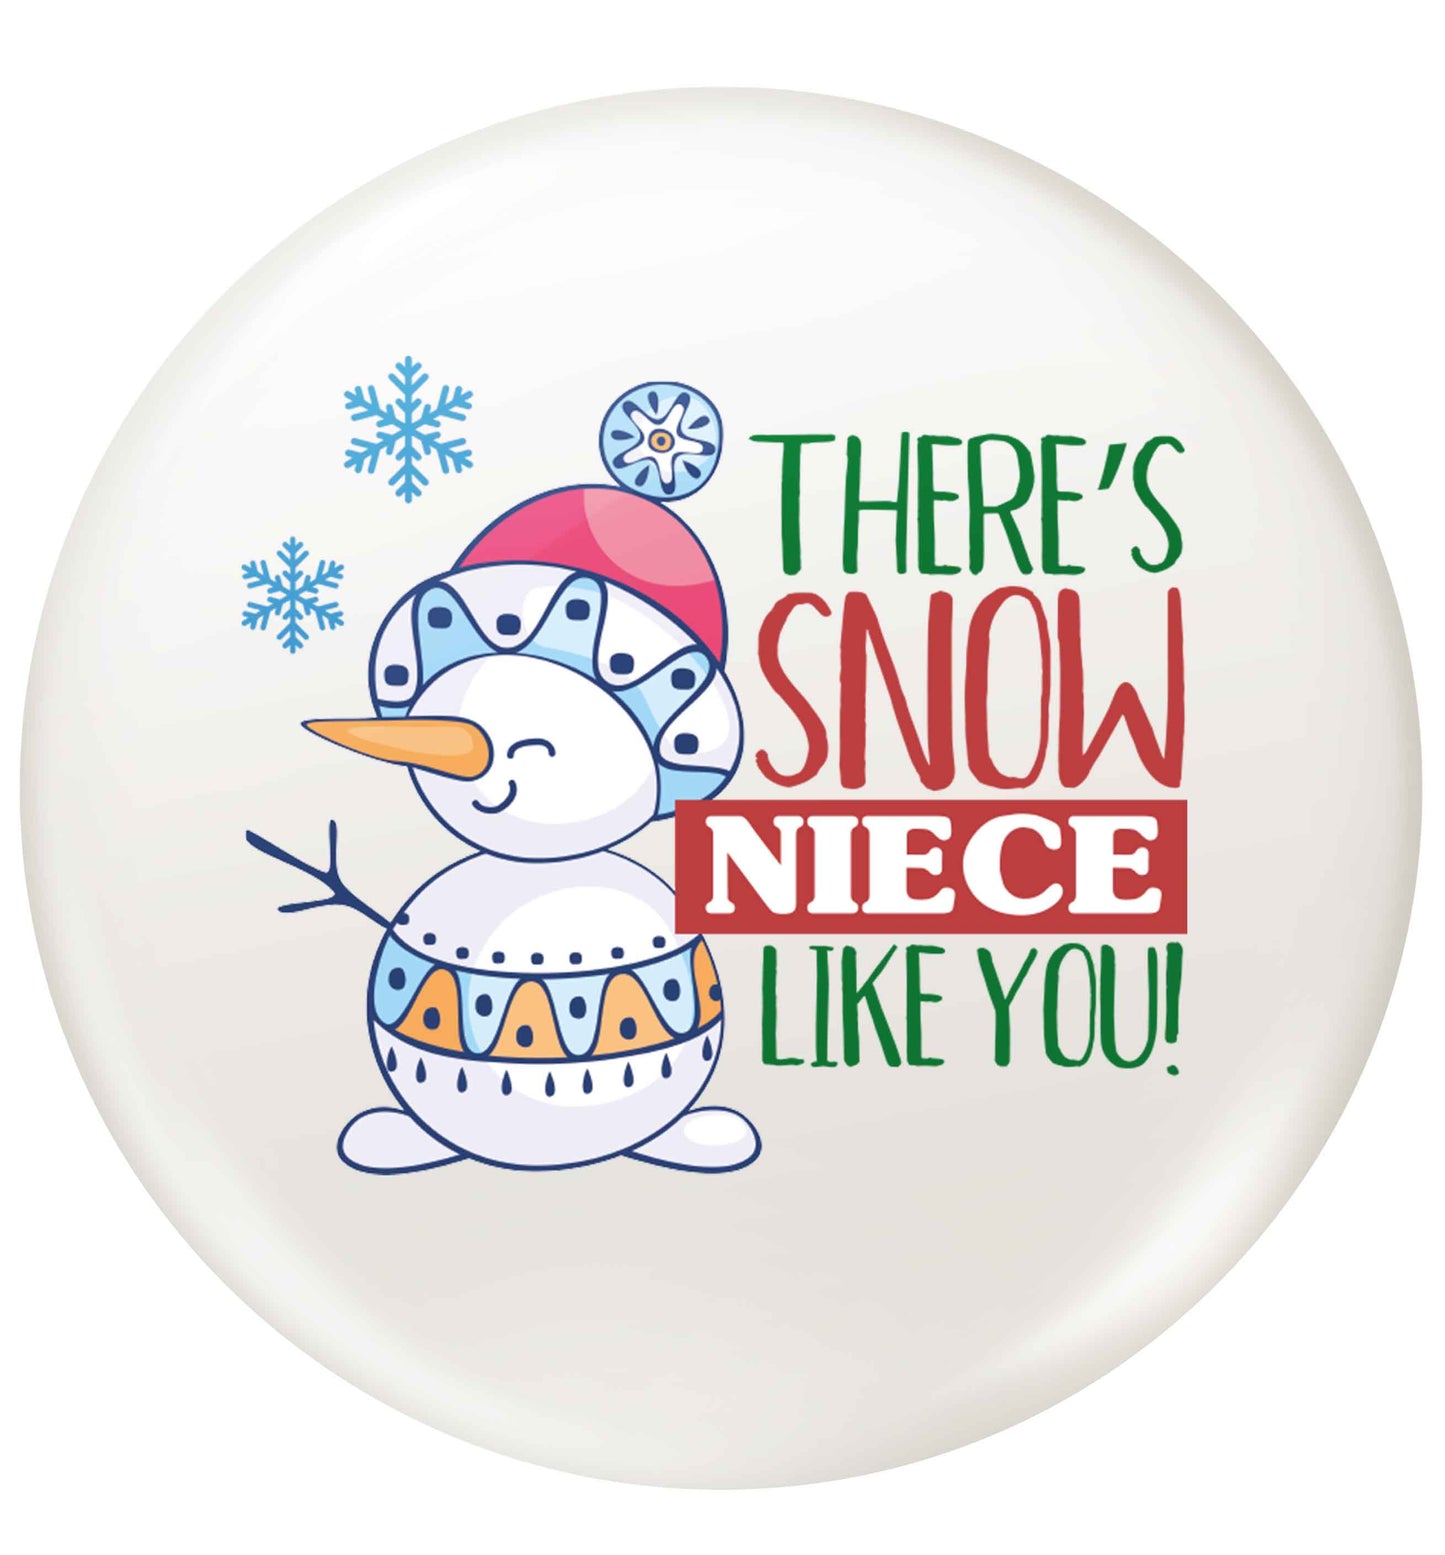 There's snow niece like you small 25mm Pin badge